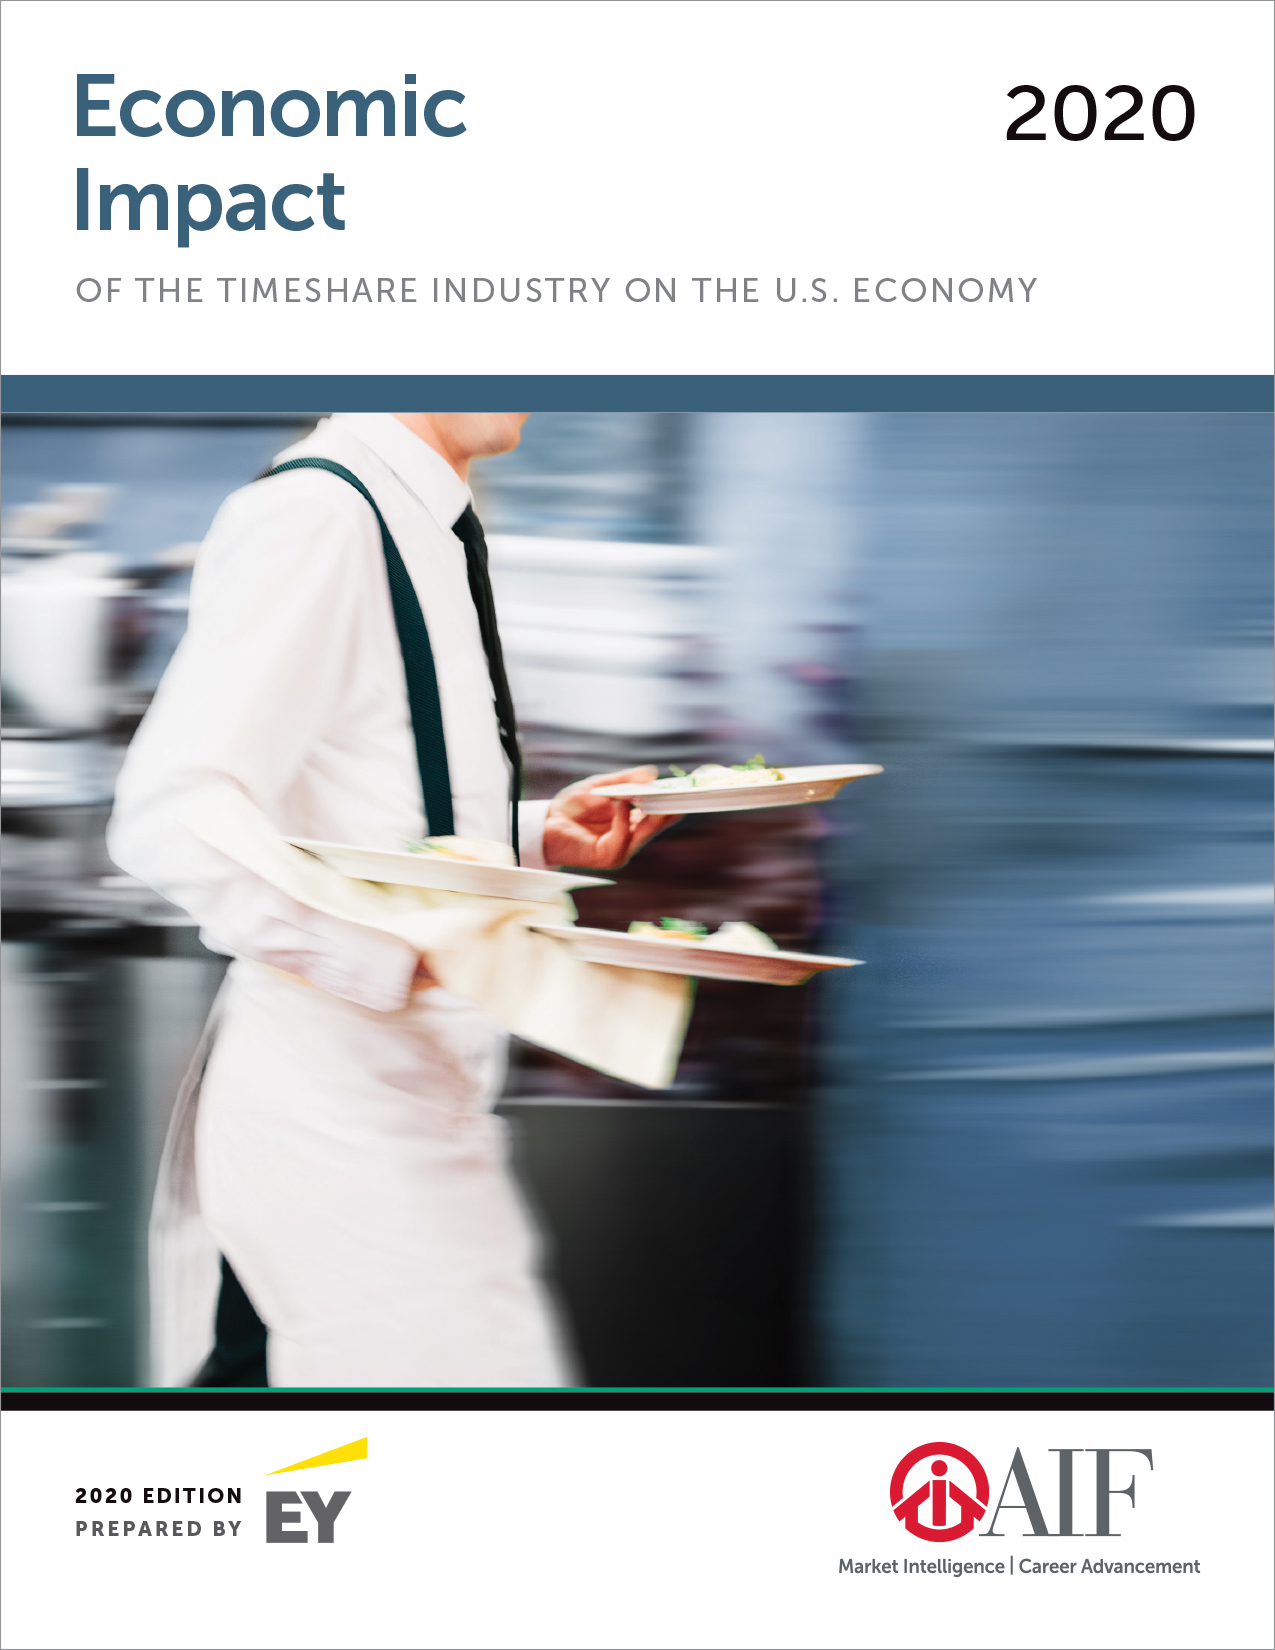 Economic Impact of the Timeshare Industry on the U.S. Economy, 2020 Ed. Full Report